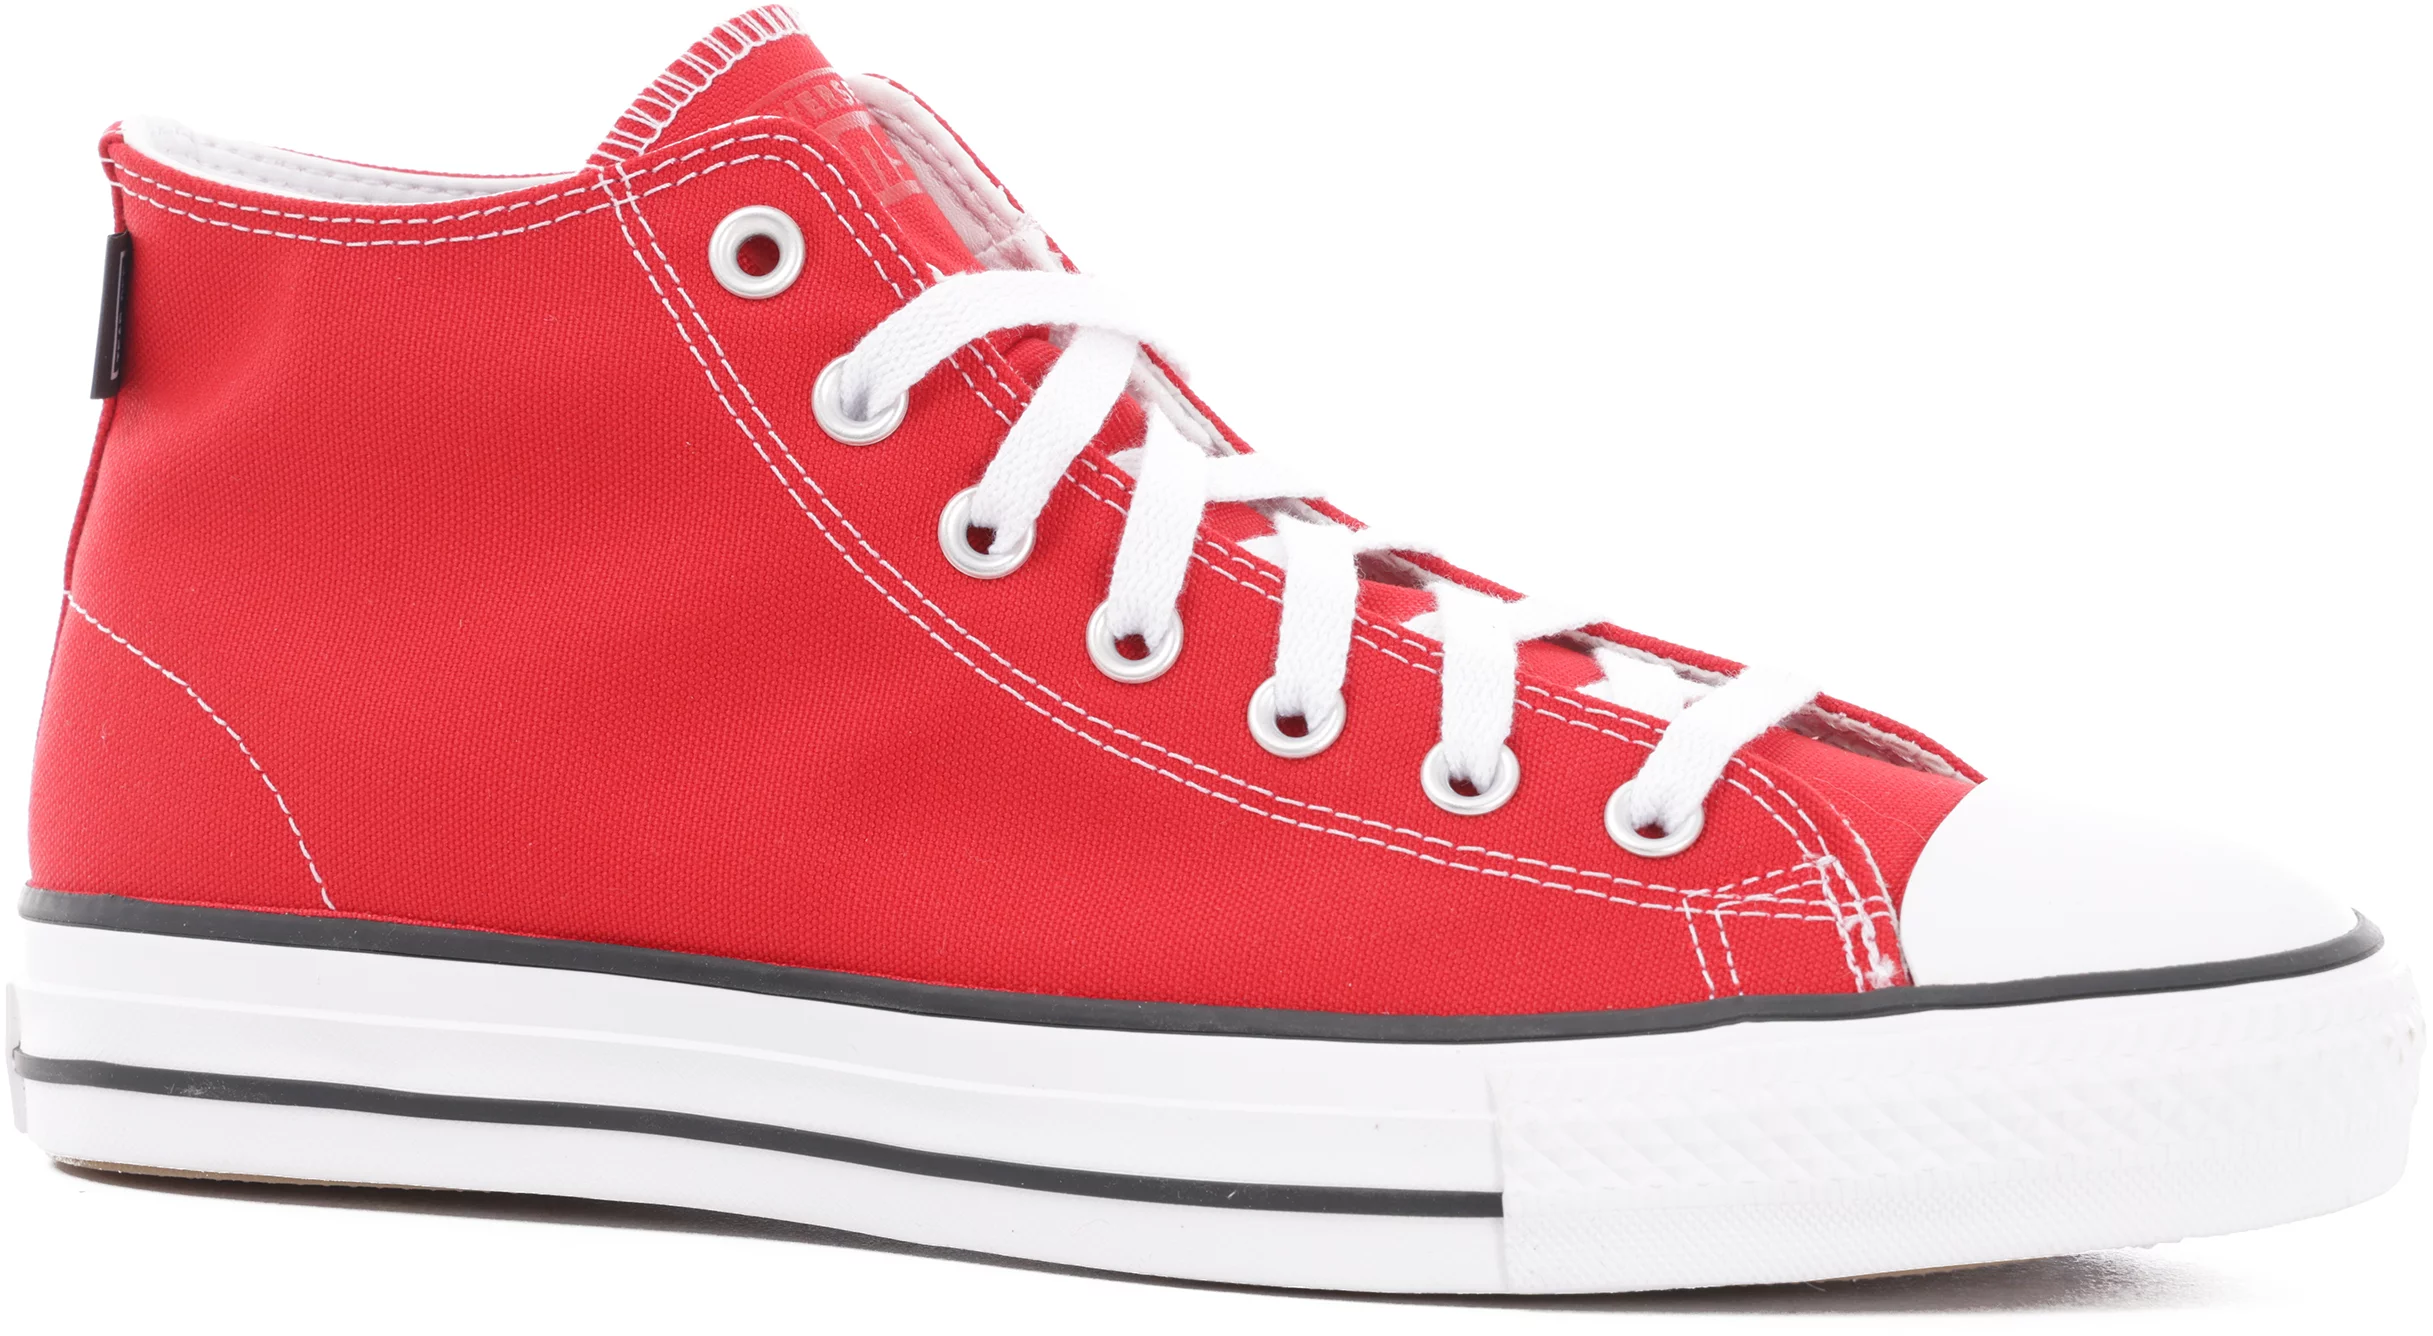 Chuck Taylor All Star Pro Mid Skate Shoes - university red/white/black Tactics